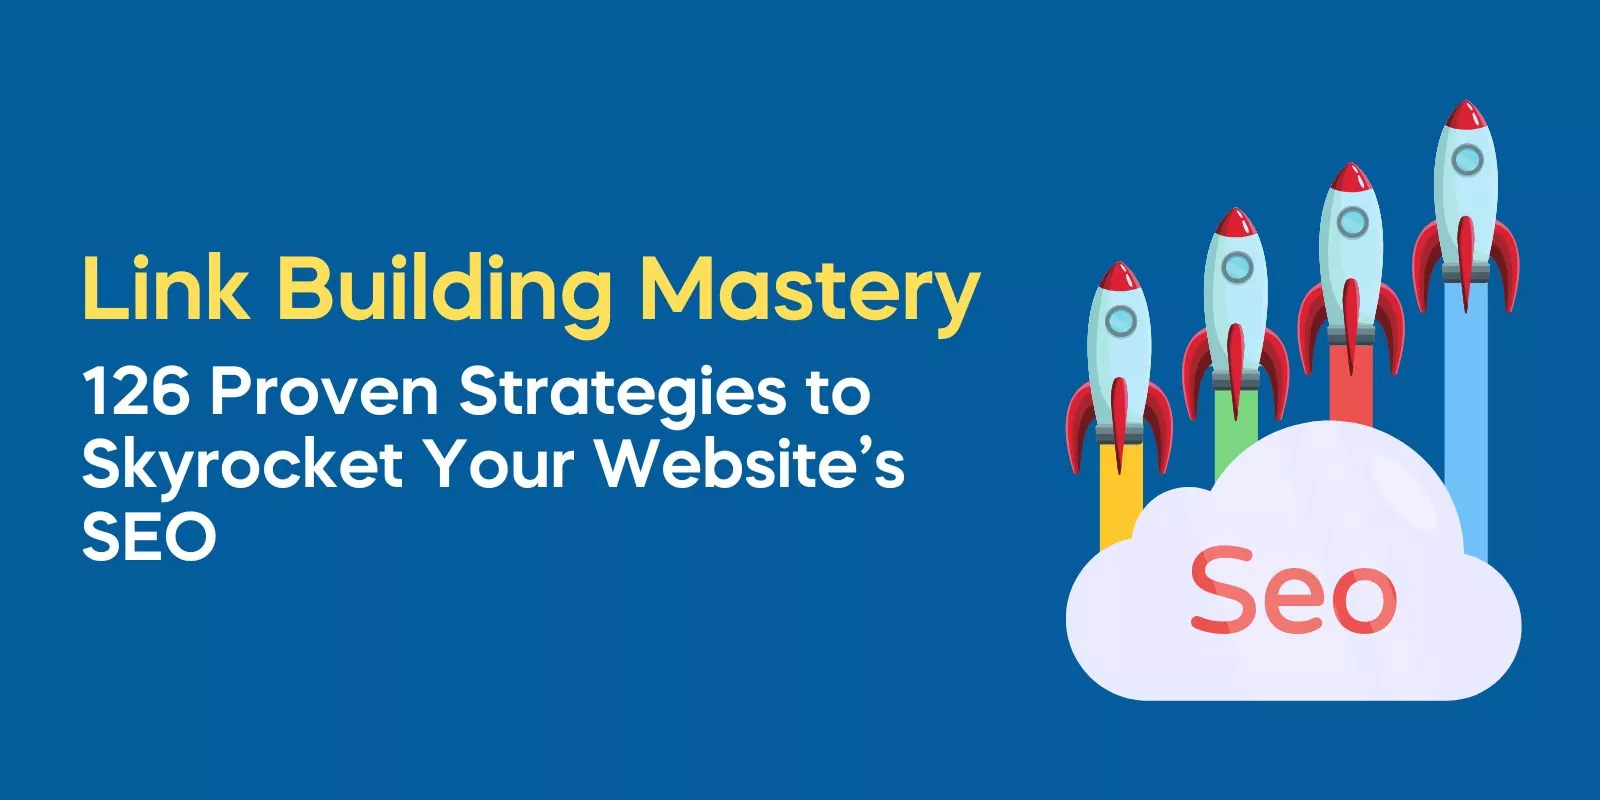 Link Building Mastery: 126 Proven Strategies to Skyrocket Your Website’s SEO